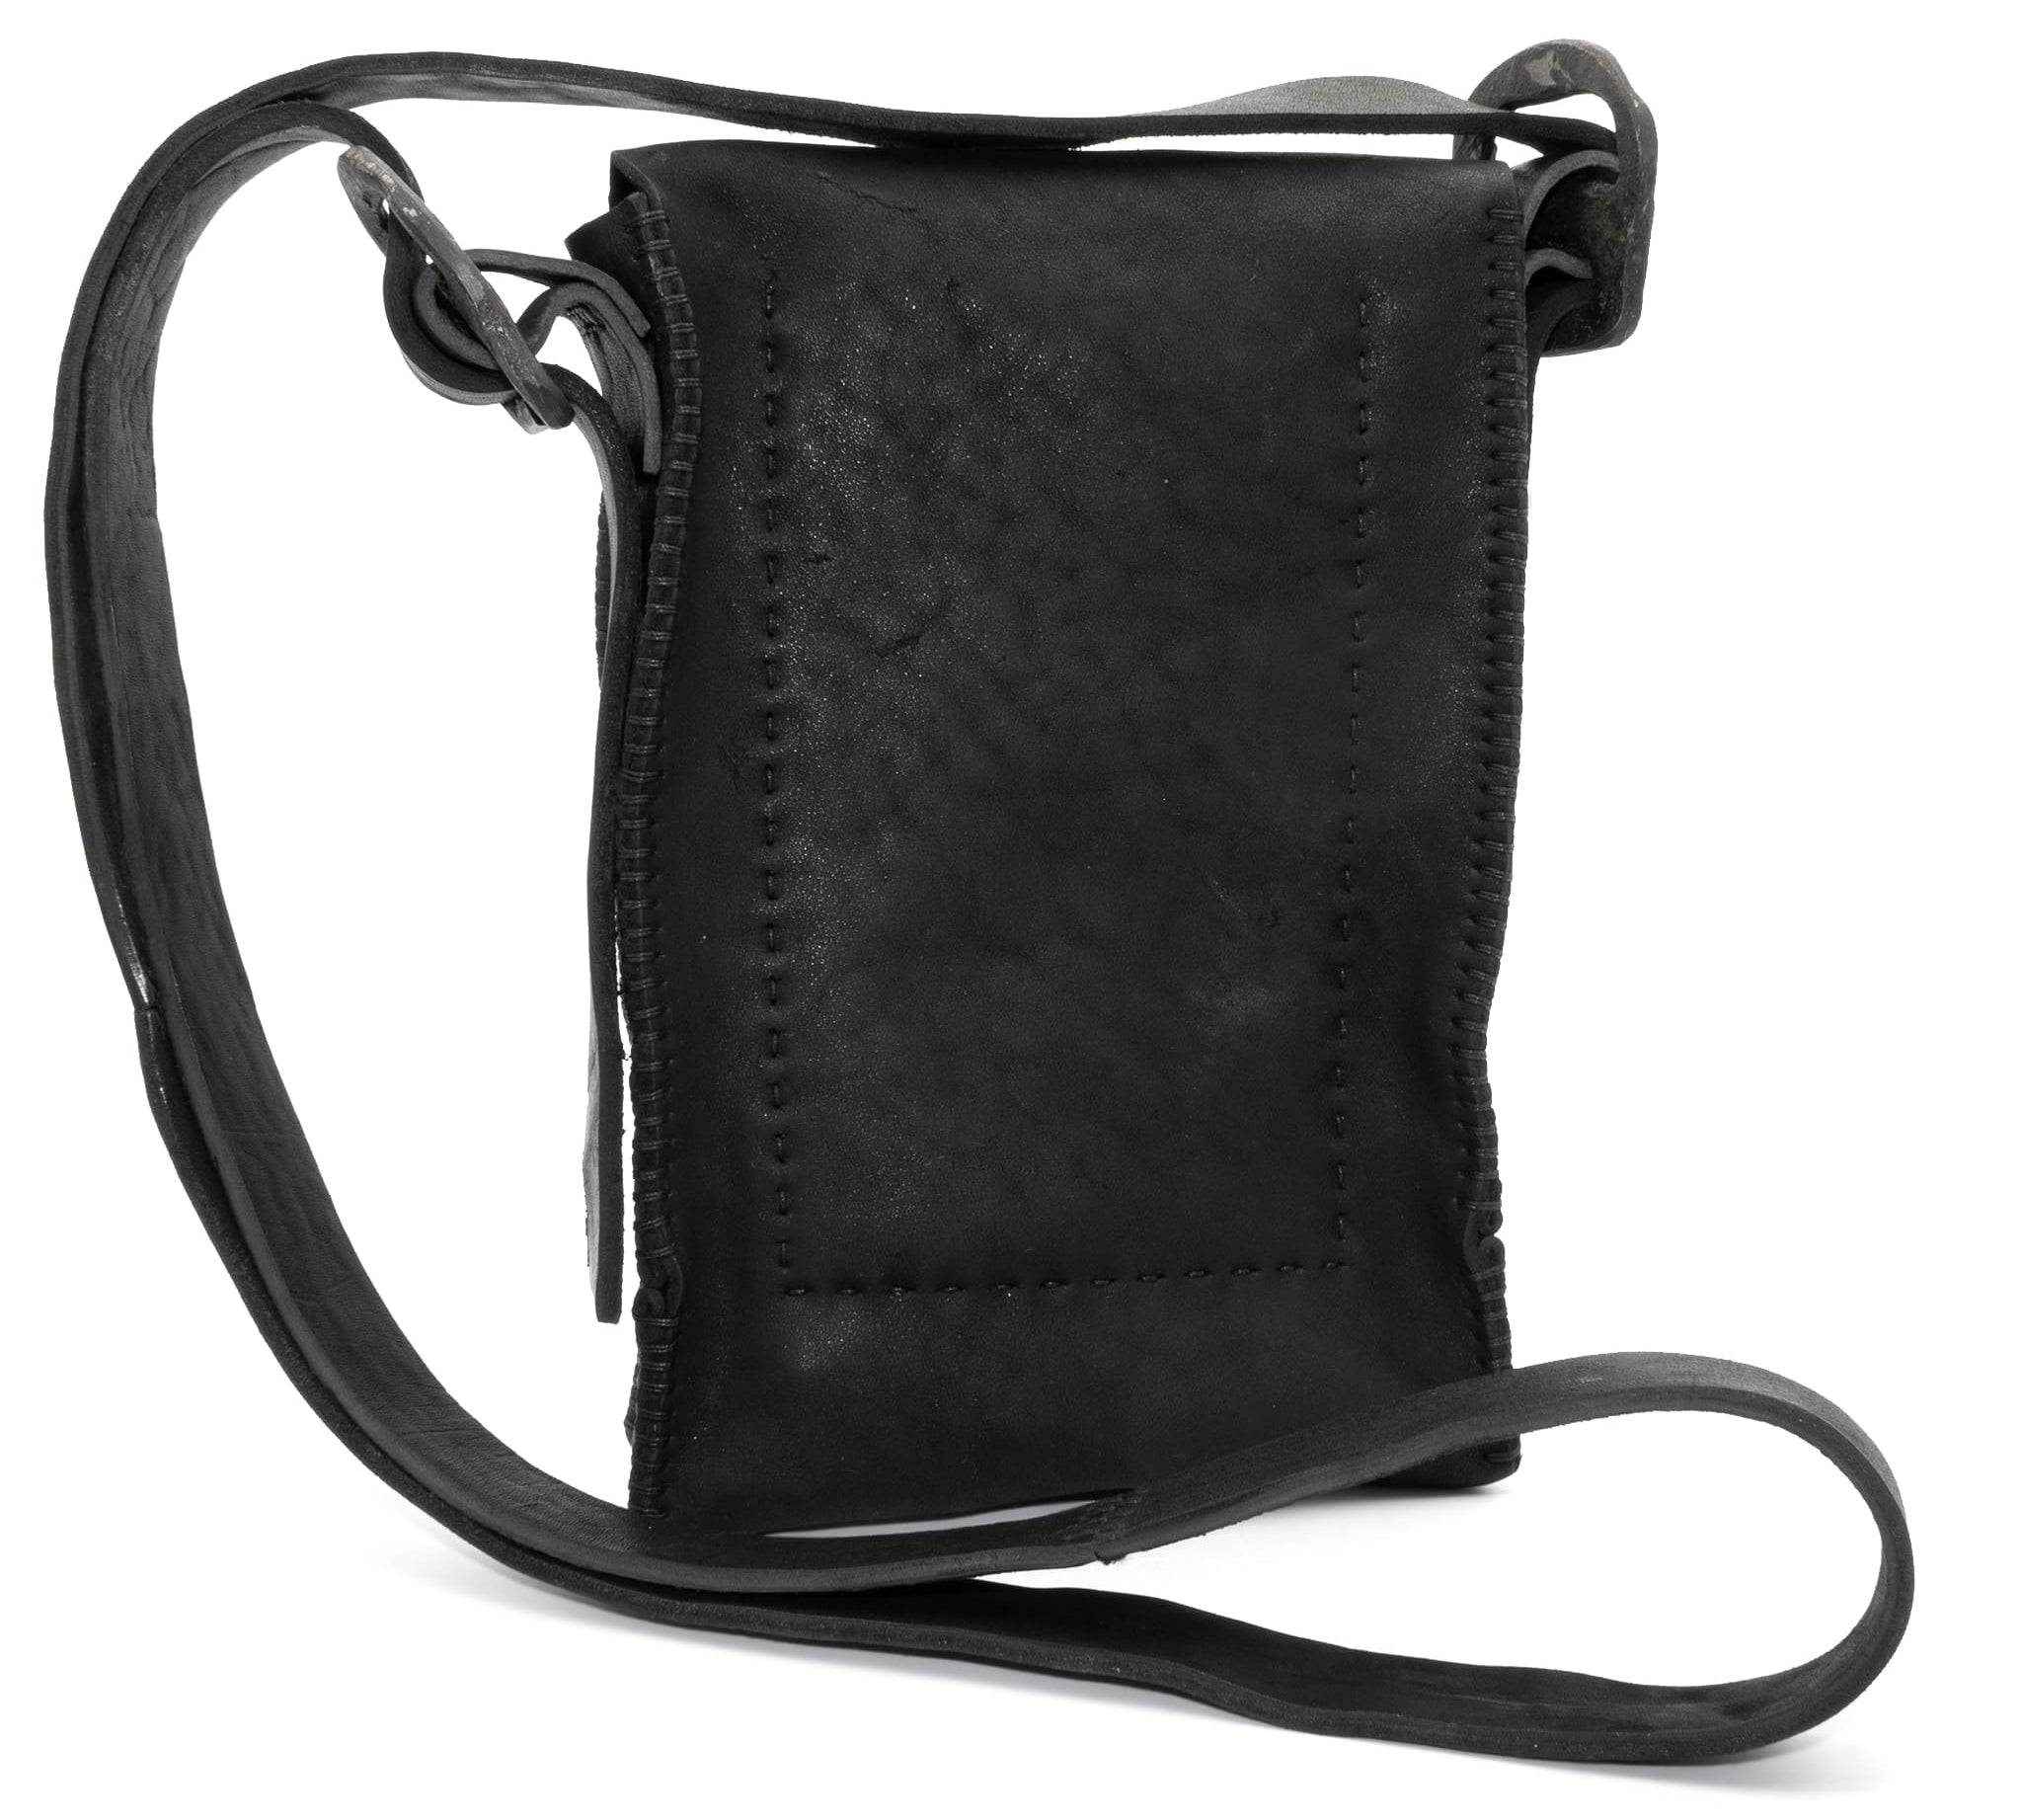 black washed culatta leather crossbody bag available to buy online at atelierskn.com. an independent designer offering a fastidious collection of avant garde leather bags and accessories.